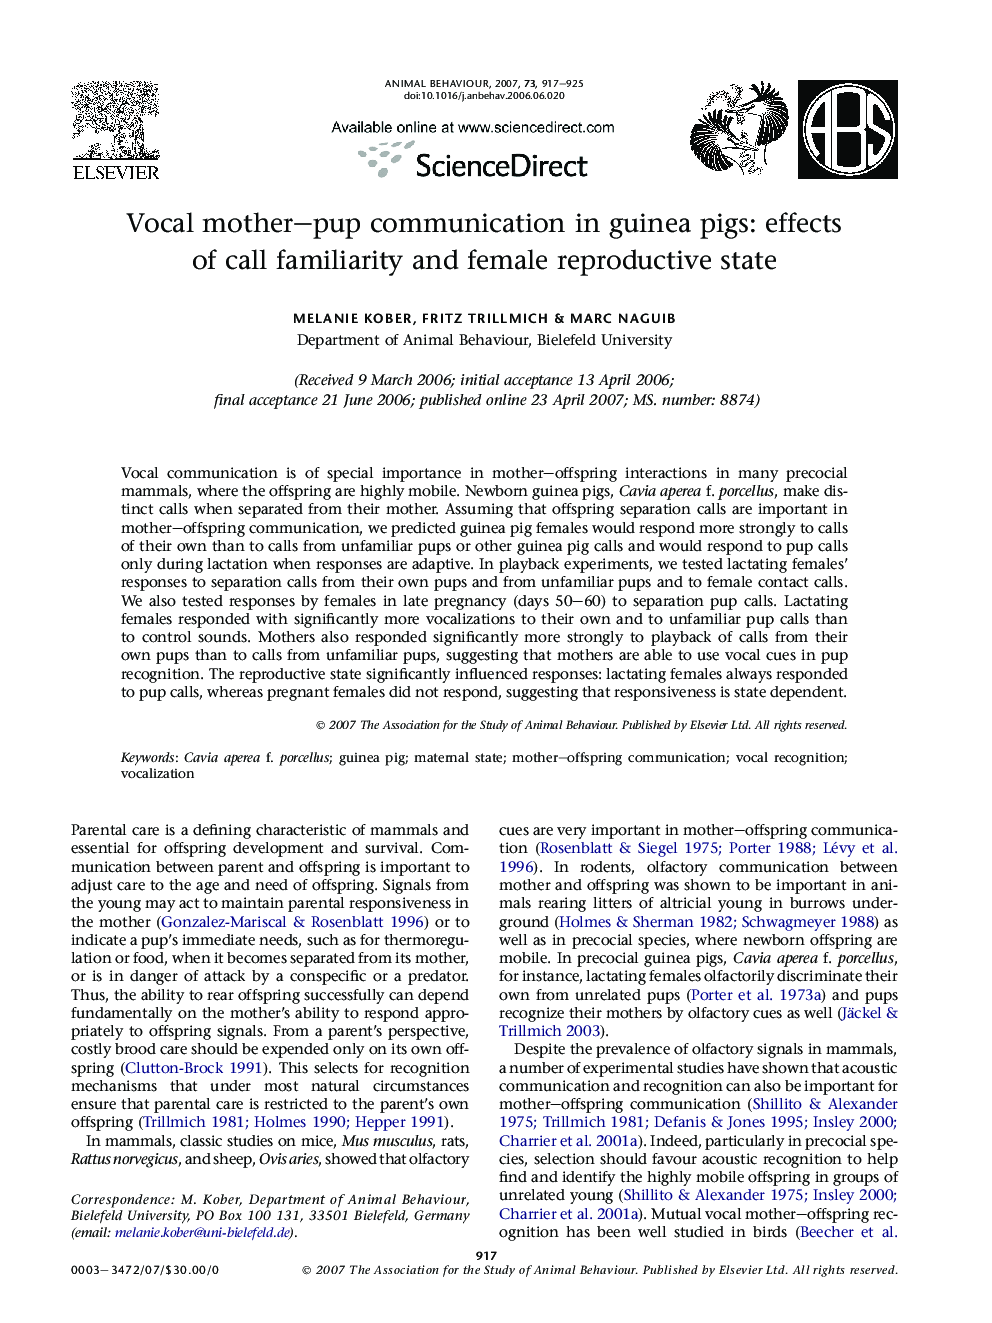 Vocal mother–pup communication in guinea pigs: effects of call familiarity and female reproductive state